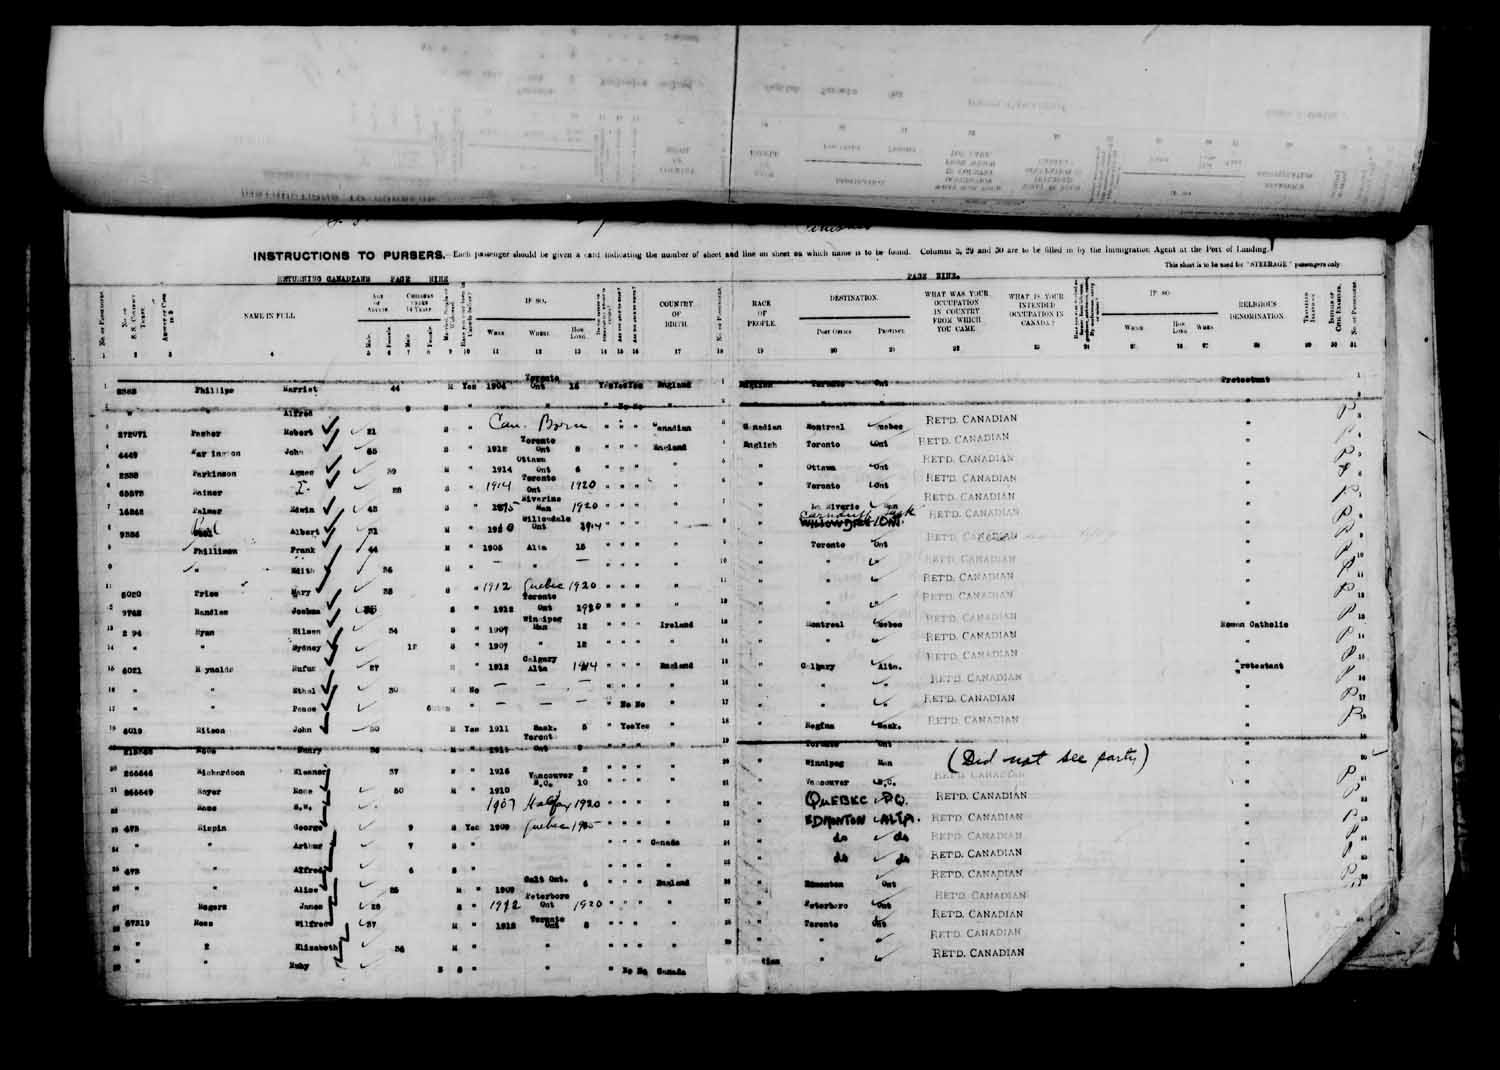 Digitized page of Passenger Lists for Image No.: e003610636